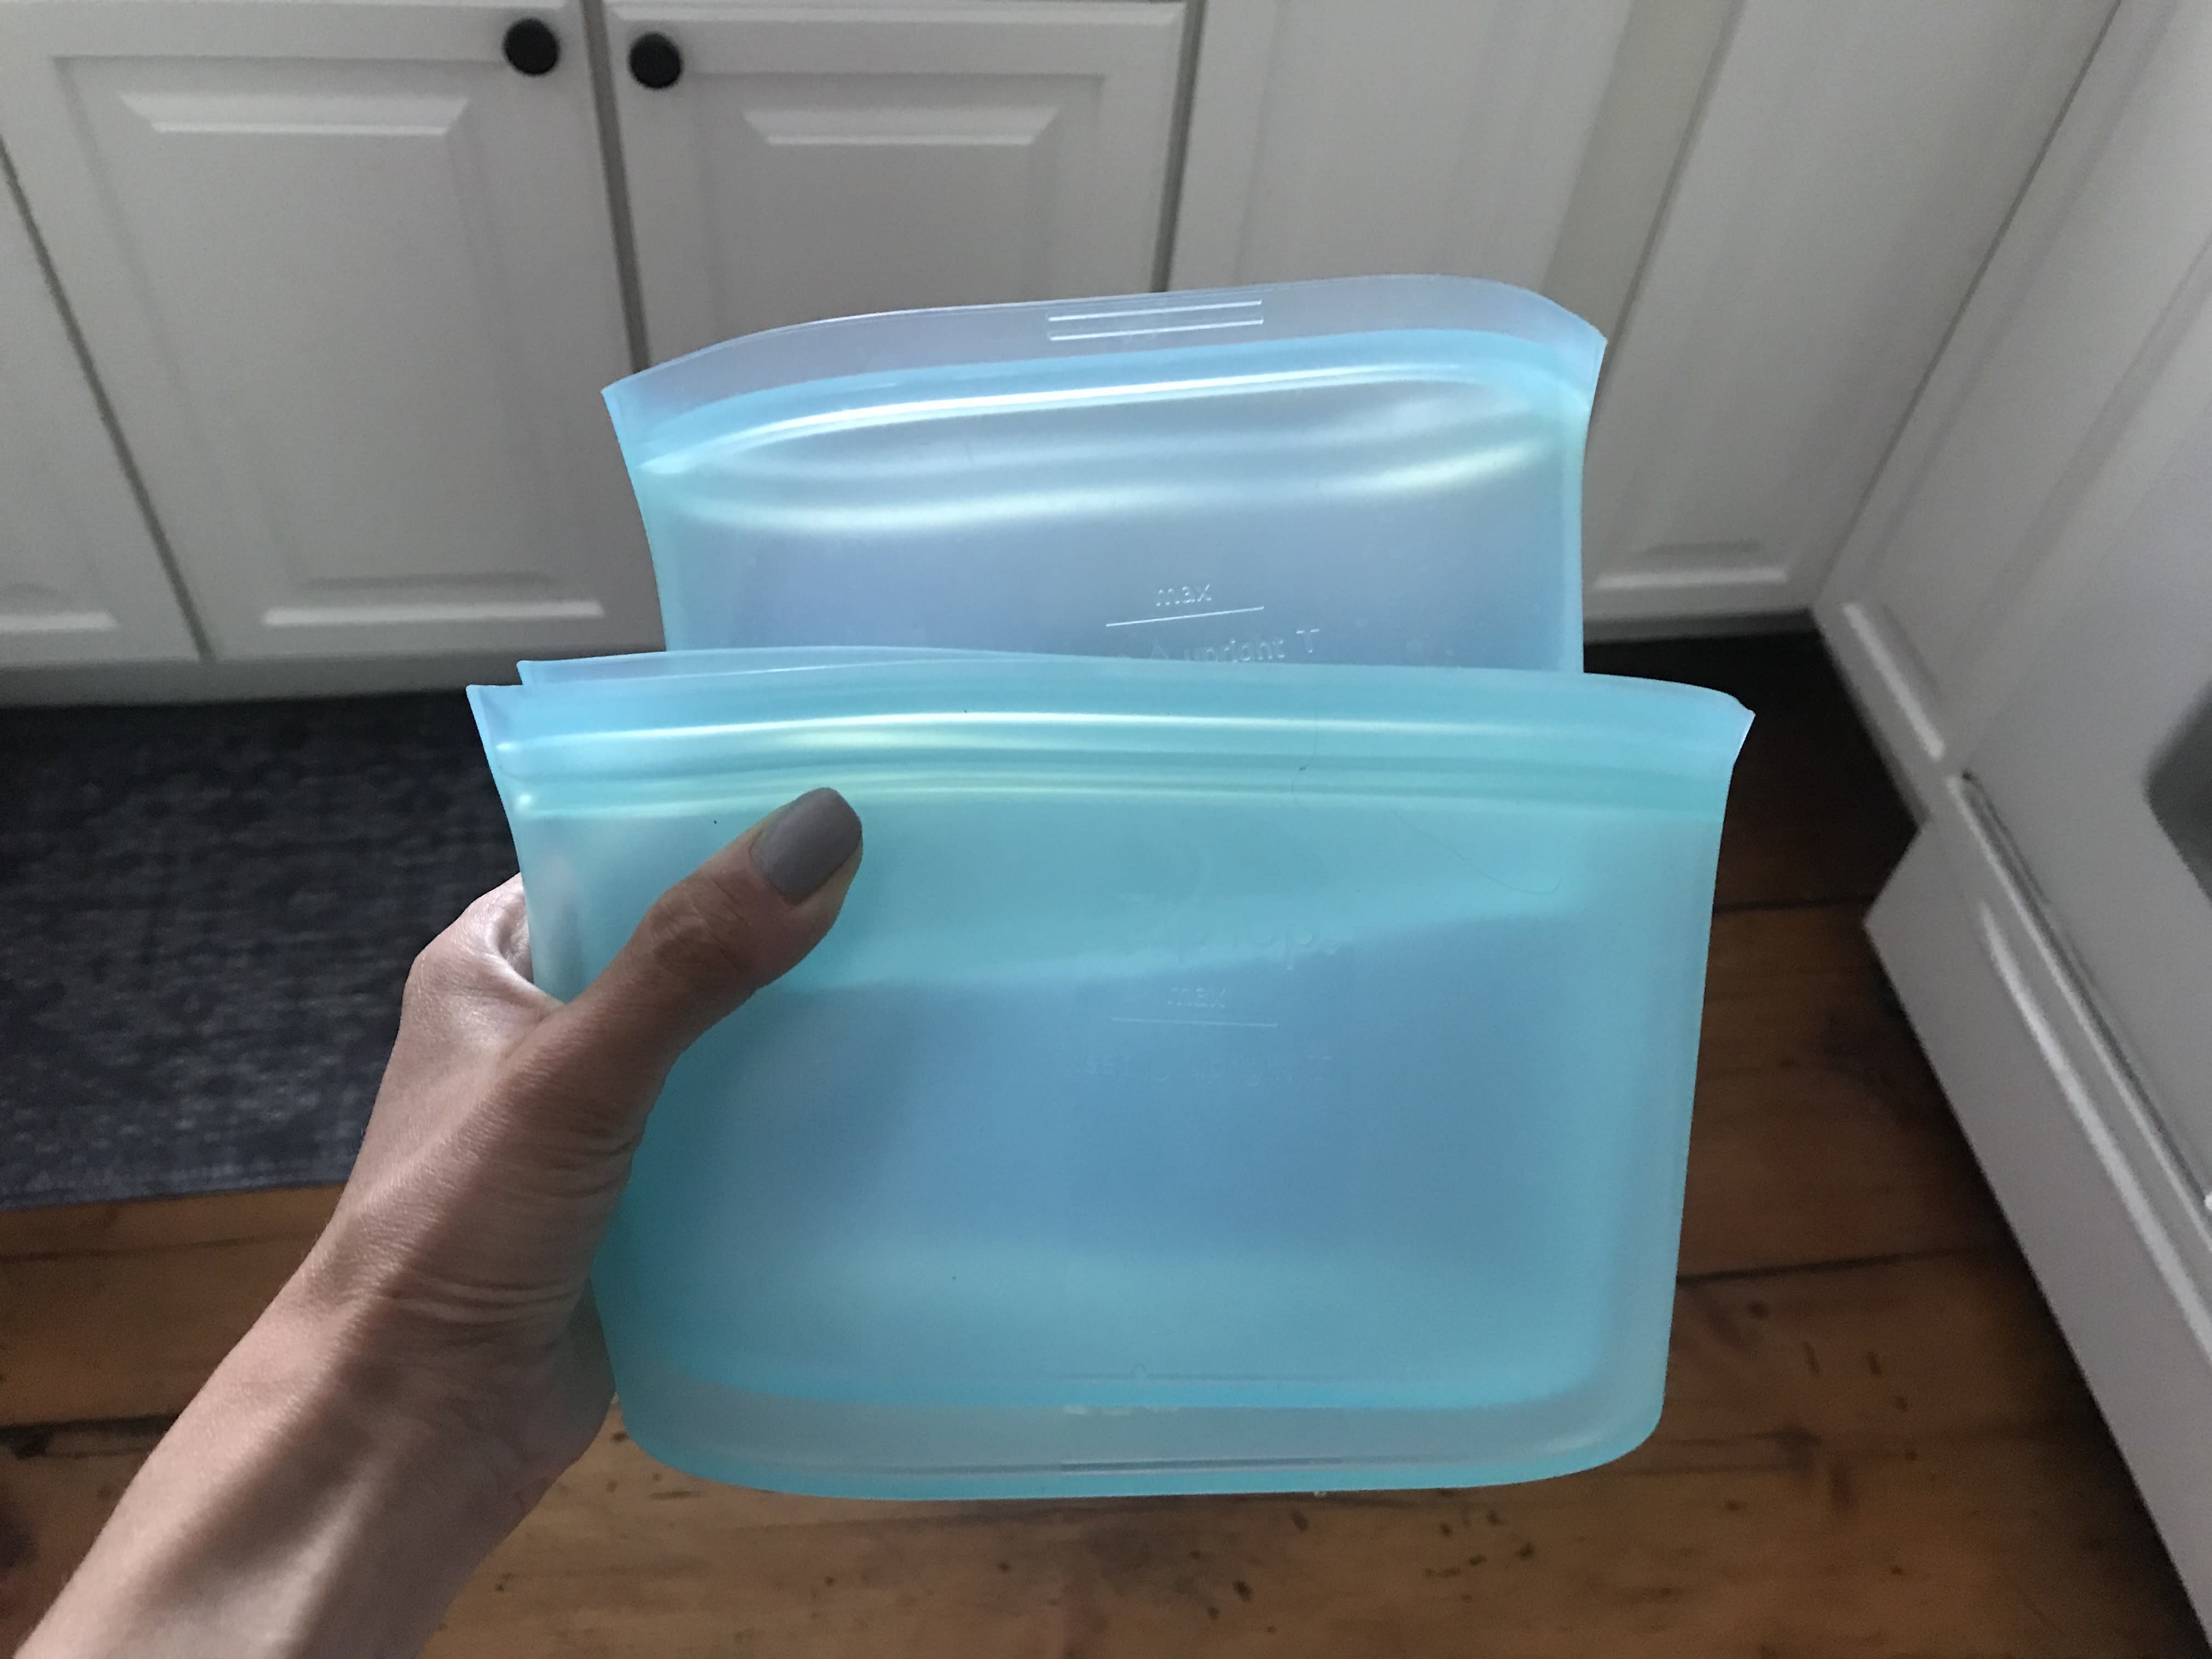 Zip Top Reusable 100% Silicone Food Storage Bags and Containers